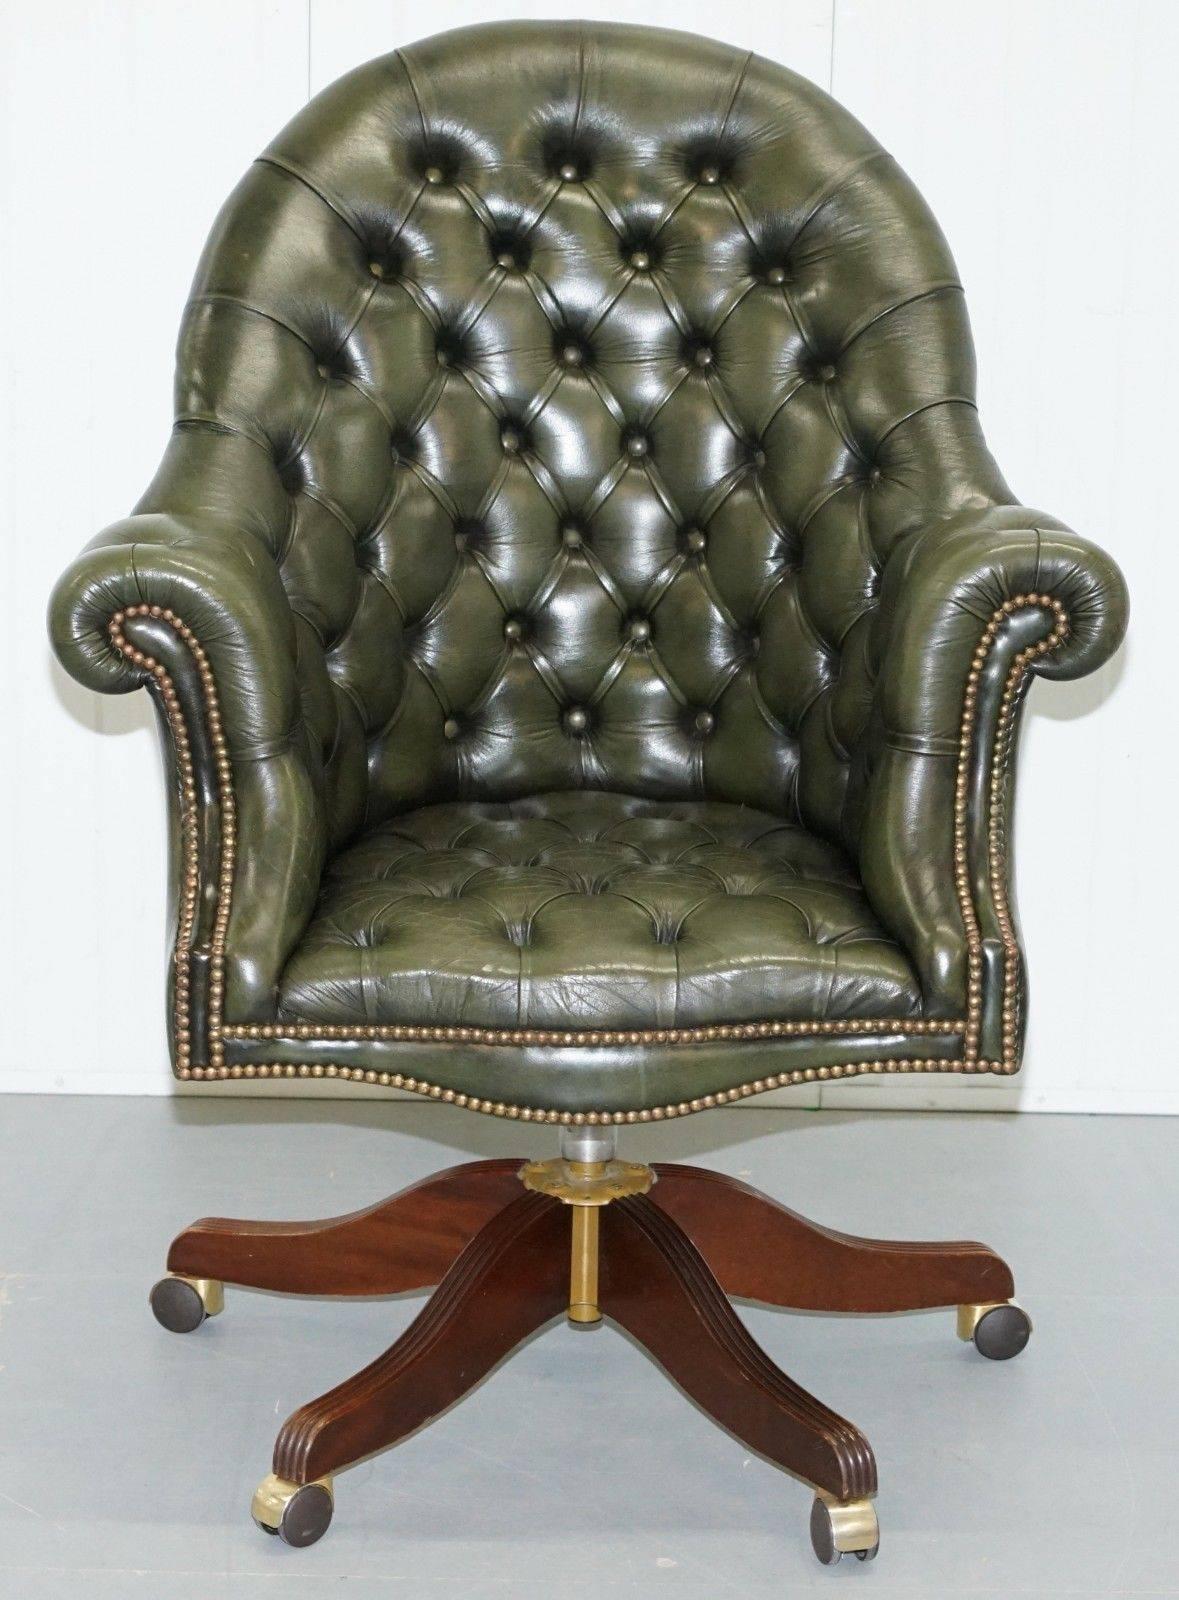 We are delighted to offer for auctionsale this lovely Bevan Funnel directors green leather captains office chair RRP £3850

All Bevan Funnell pieces are handmade in England to order, nothing is shelf bought and all materials are sourced within the